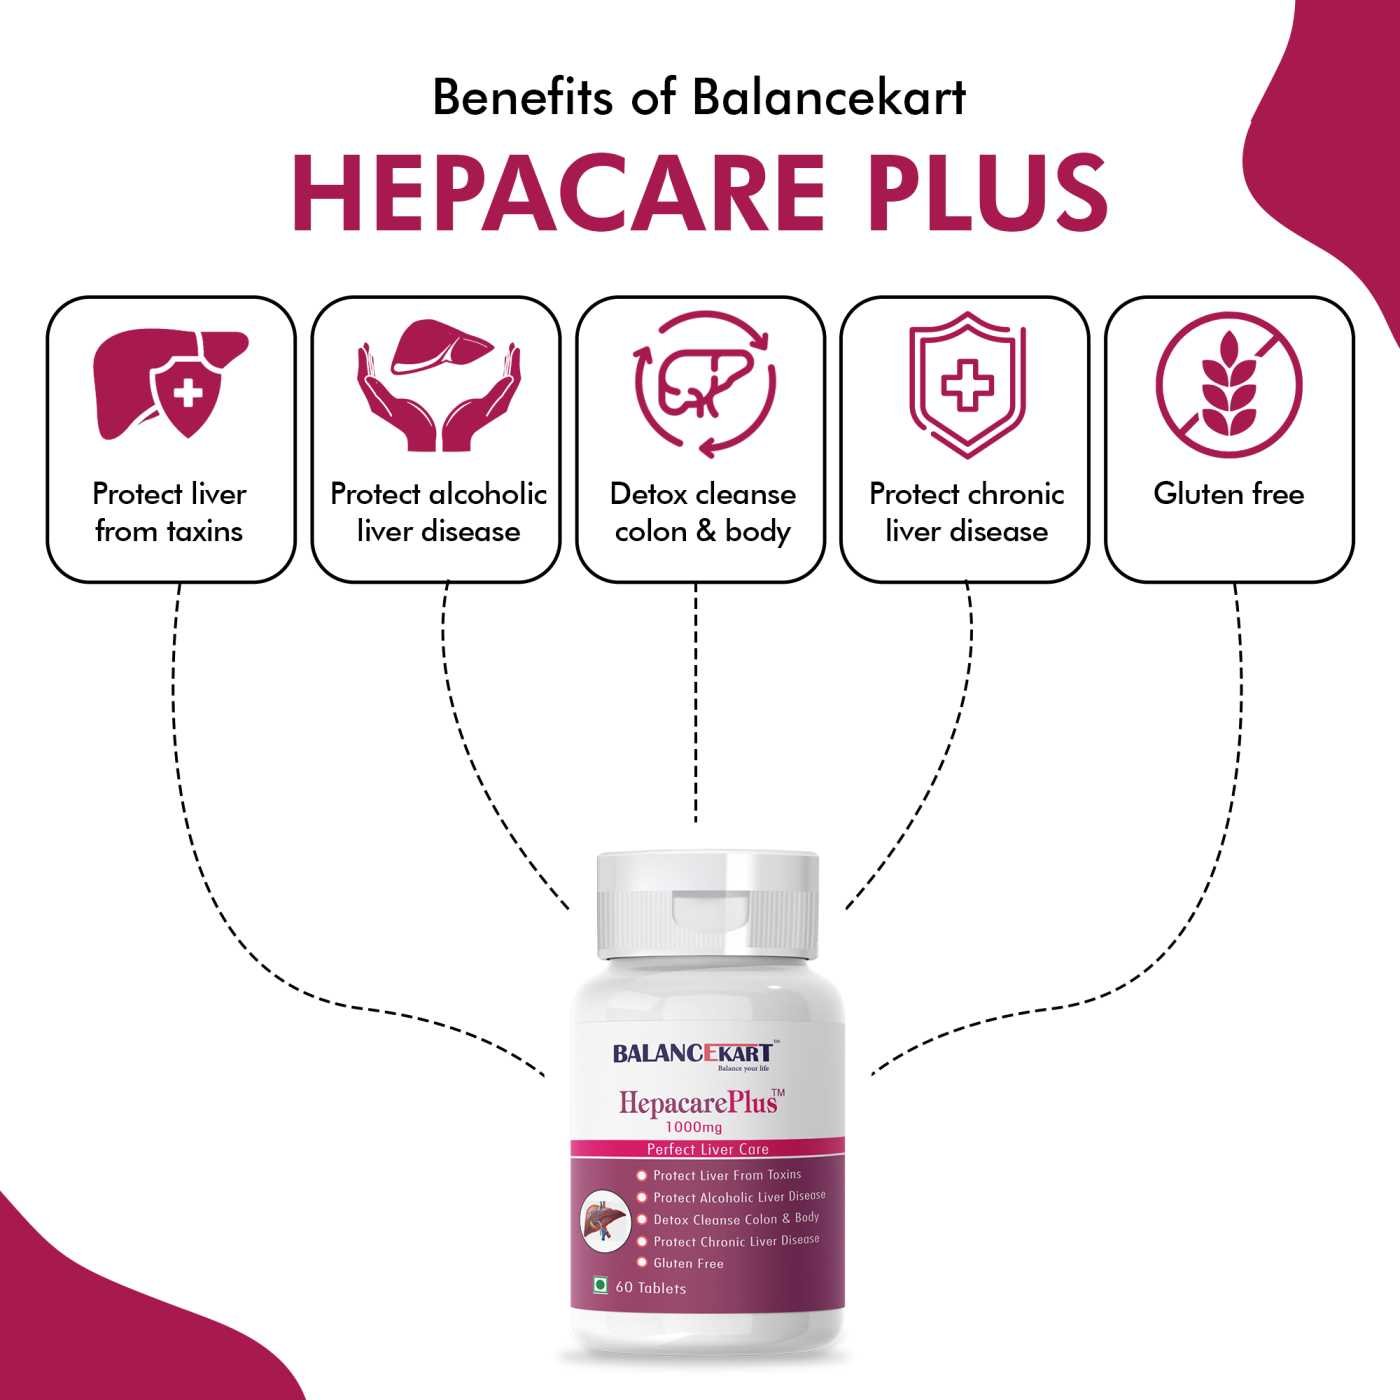 Hepacare Plus (60 Tablets) Liver Care - A perfect Liver care & Detox Ayurvedic and natural Herbs